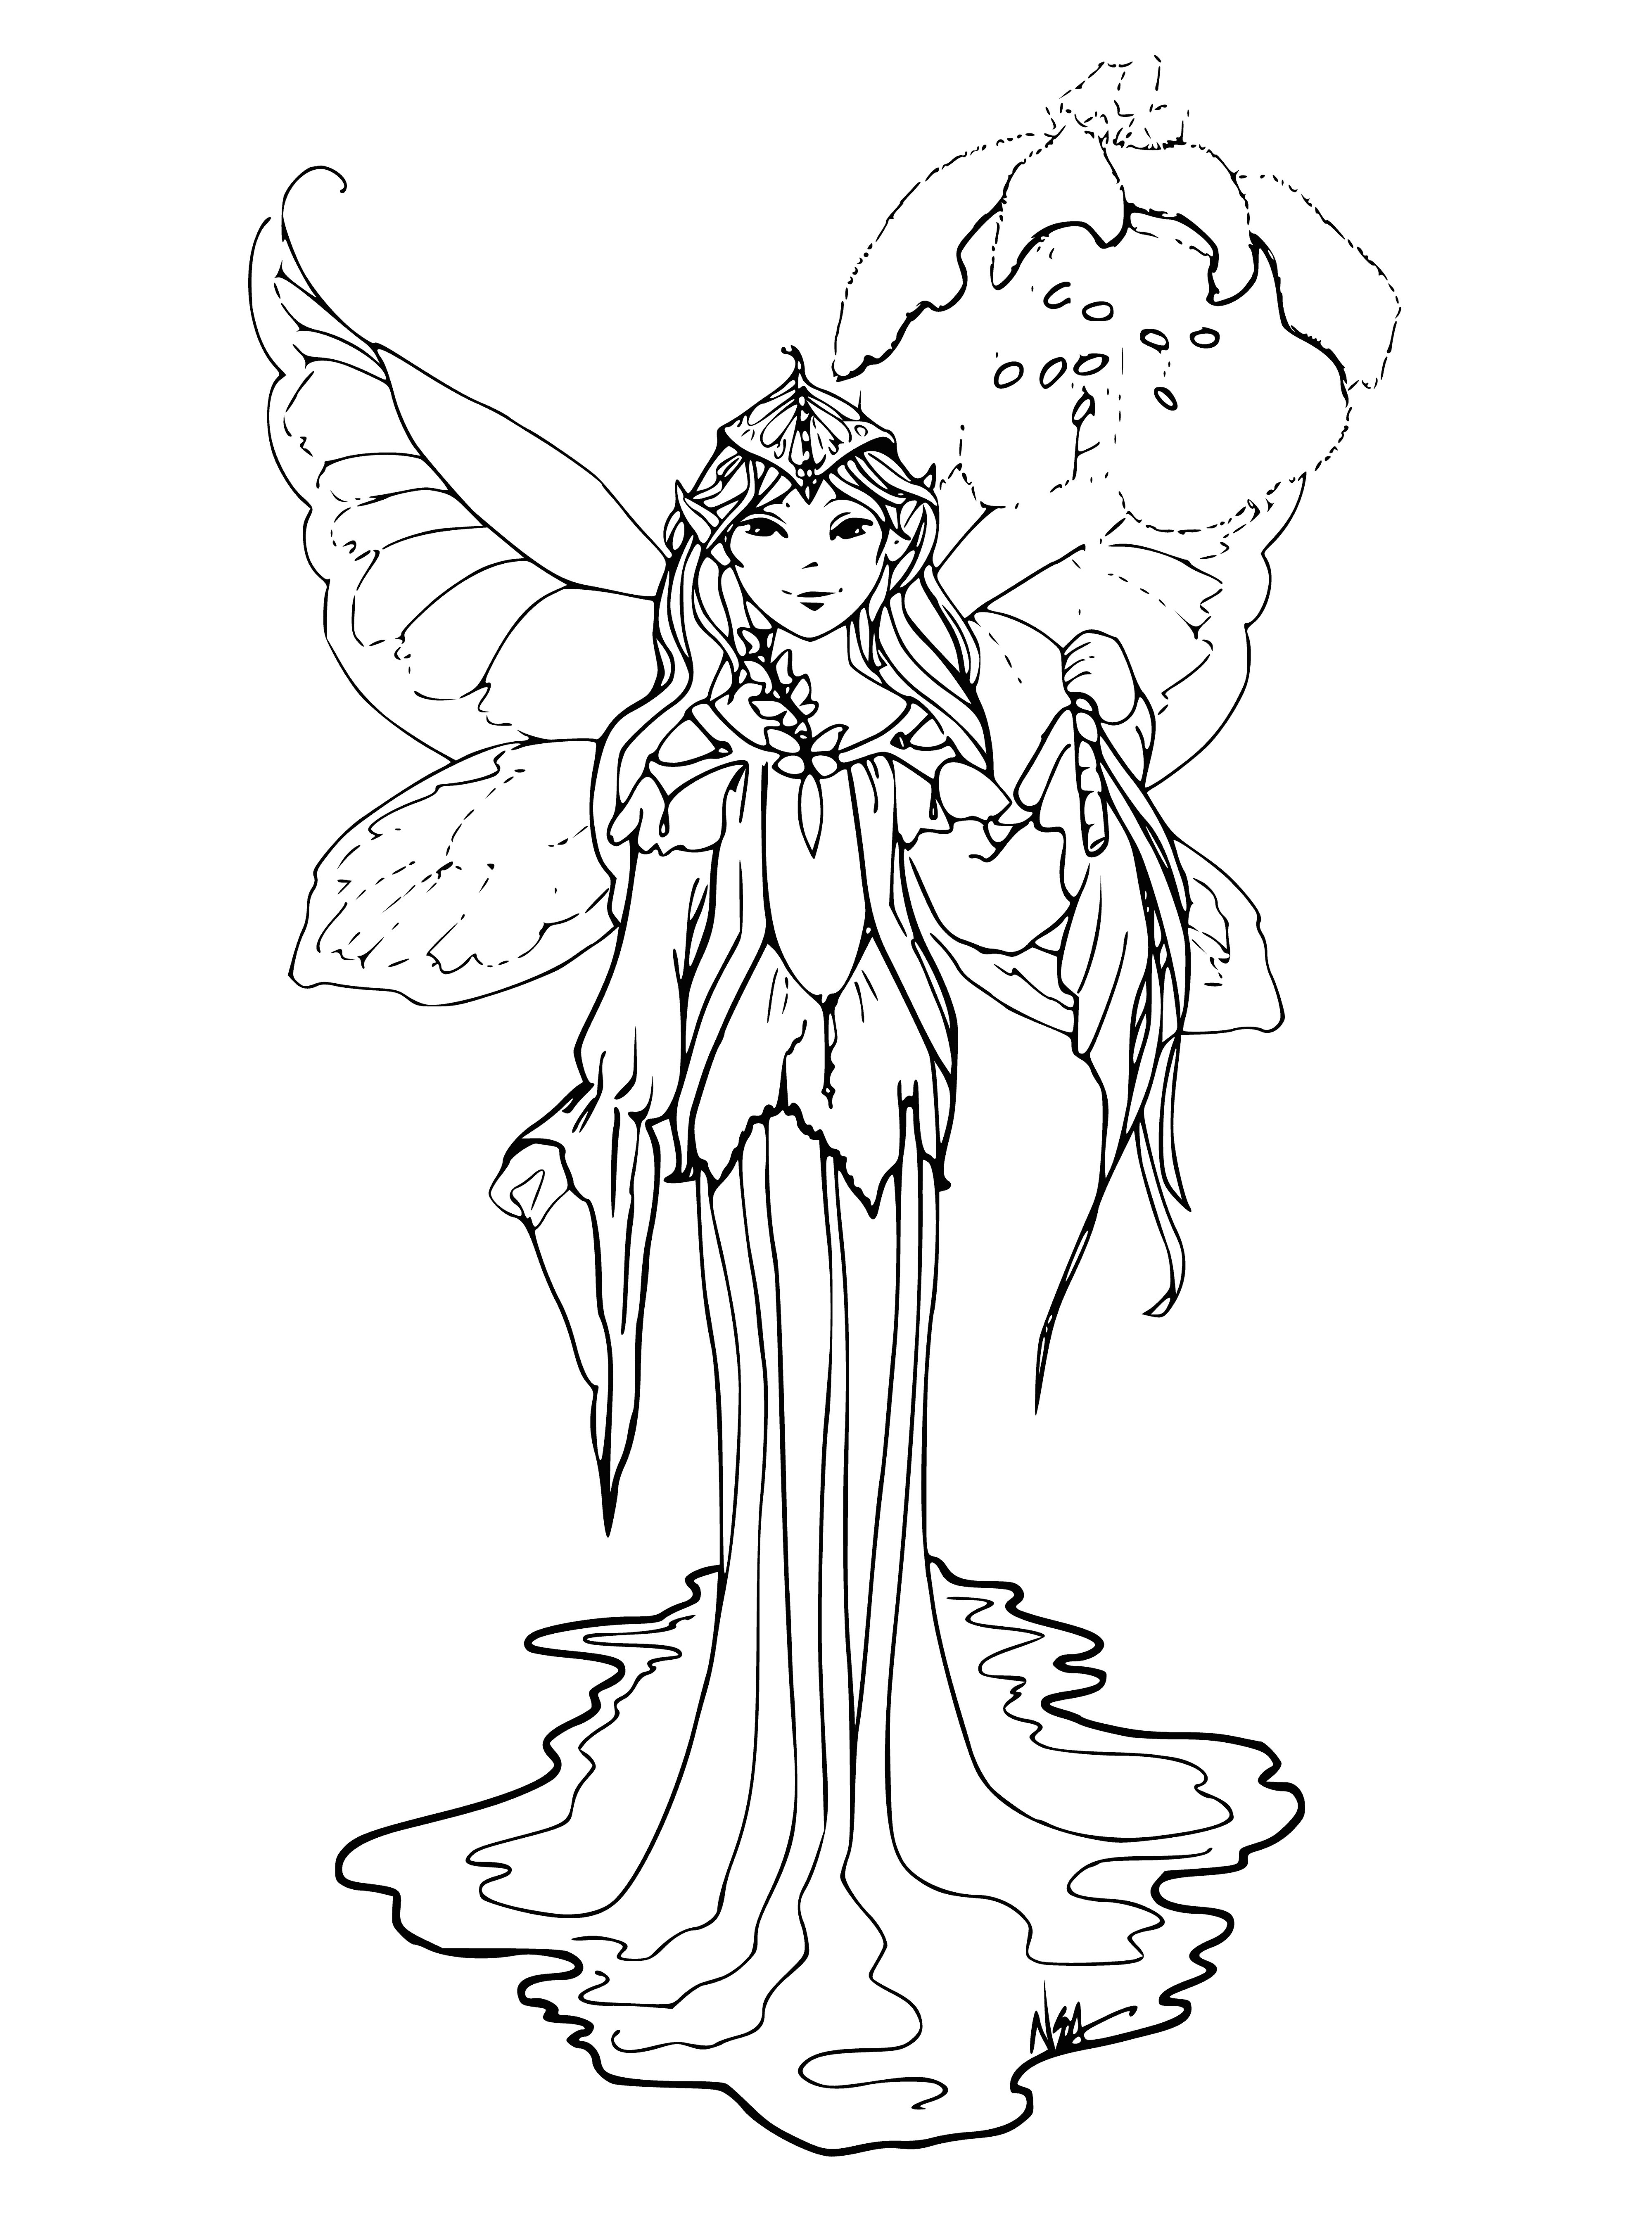 coloring page: Elves & fairies are small mythological beings with pointy ears & wings. They can be mischievous, but can also have benevolent sides.